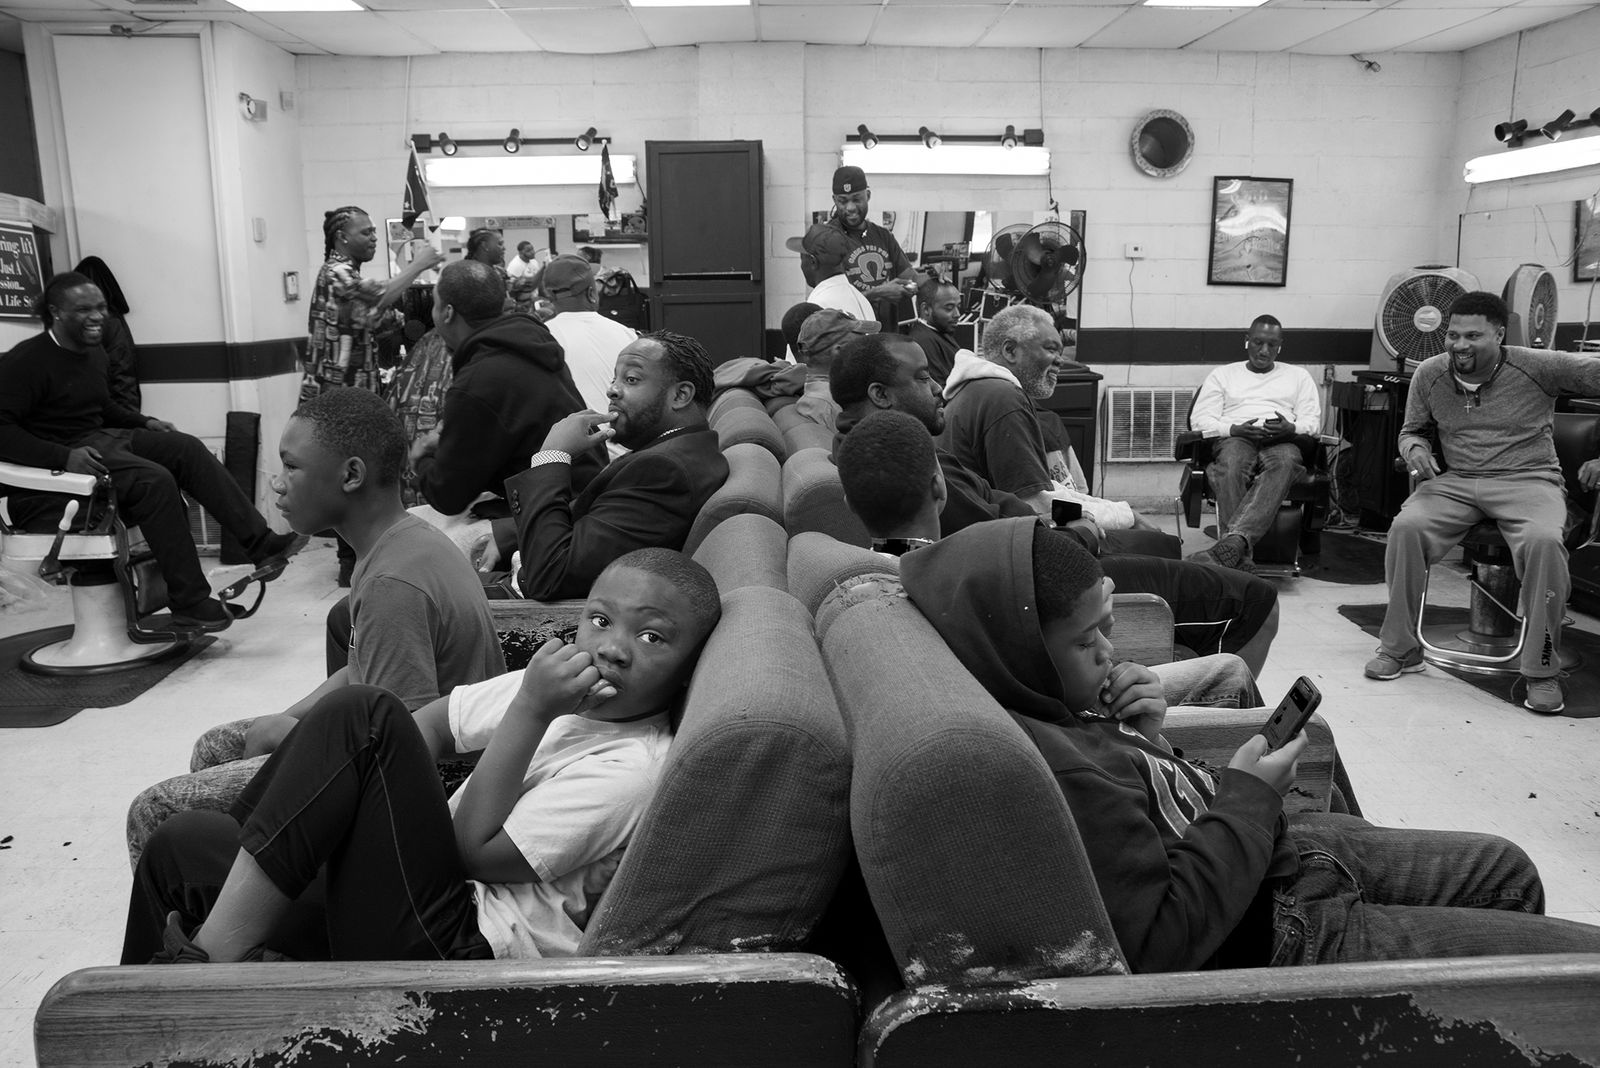 © Rebecca Moseman - Barbershop Crowd. A scene from a crowded local barbershop within the city of Clarksdale, Mississippi.